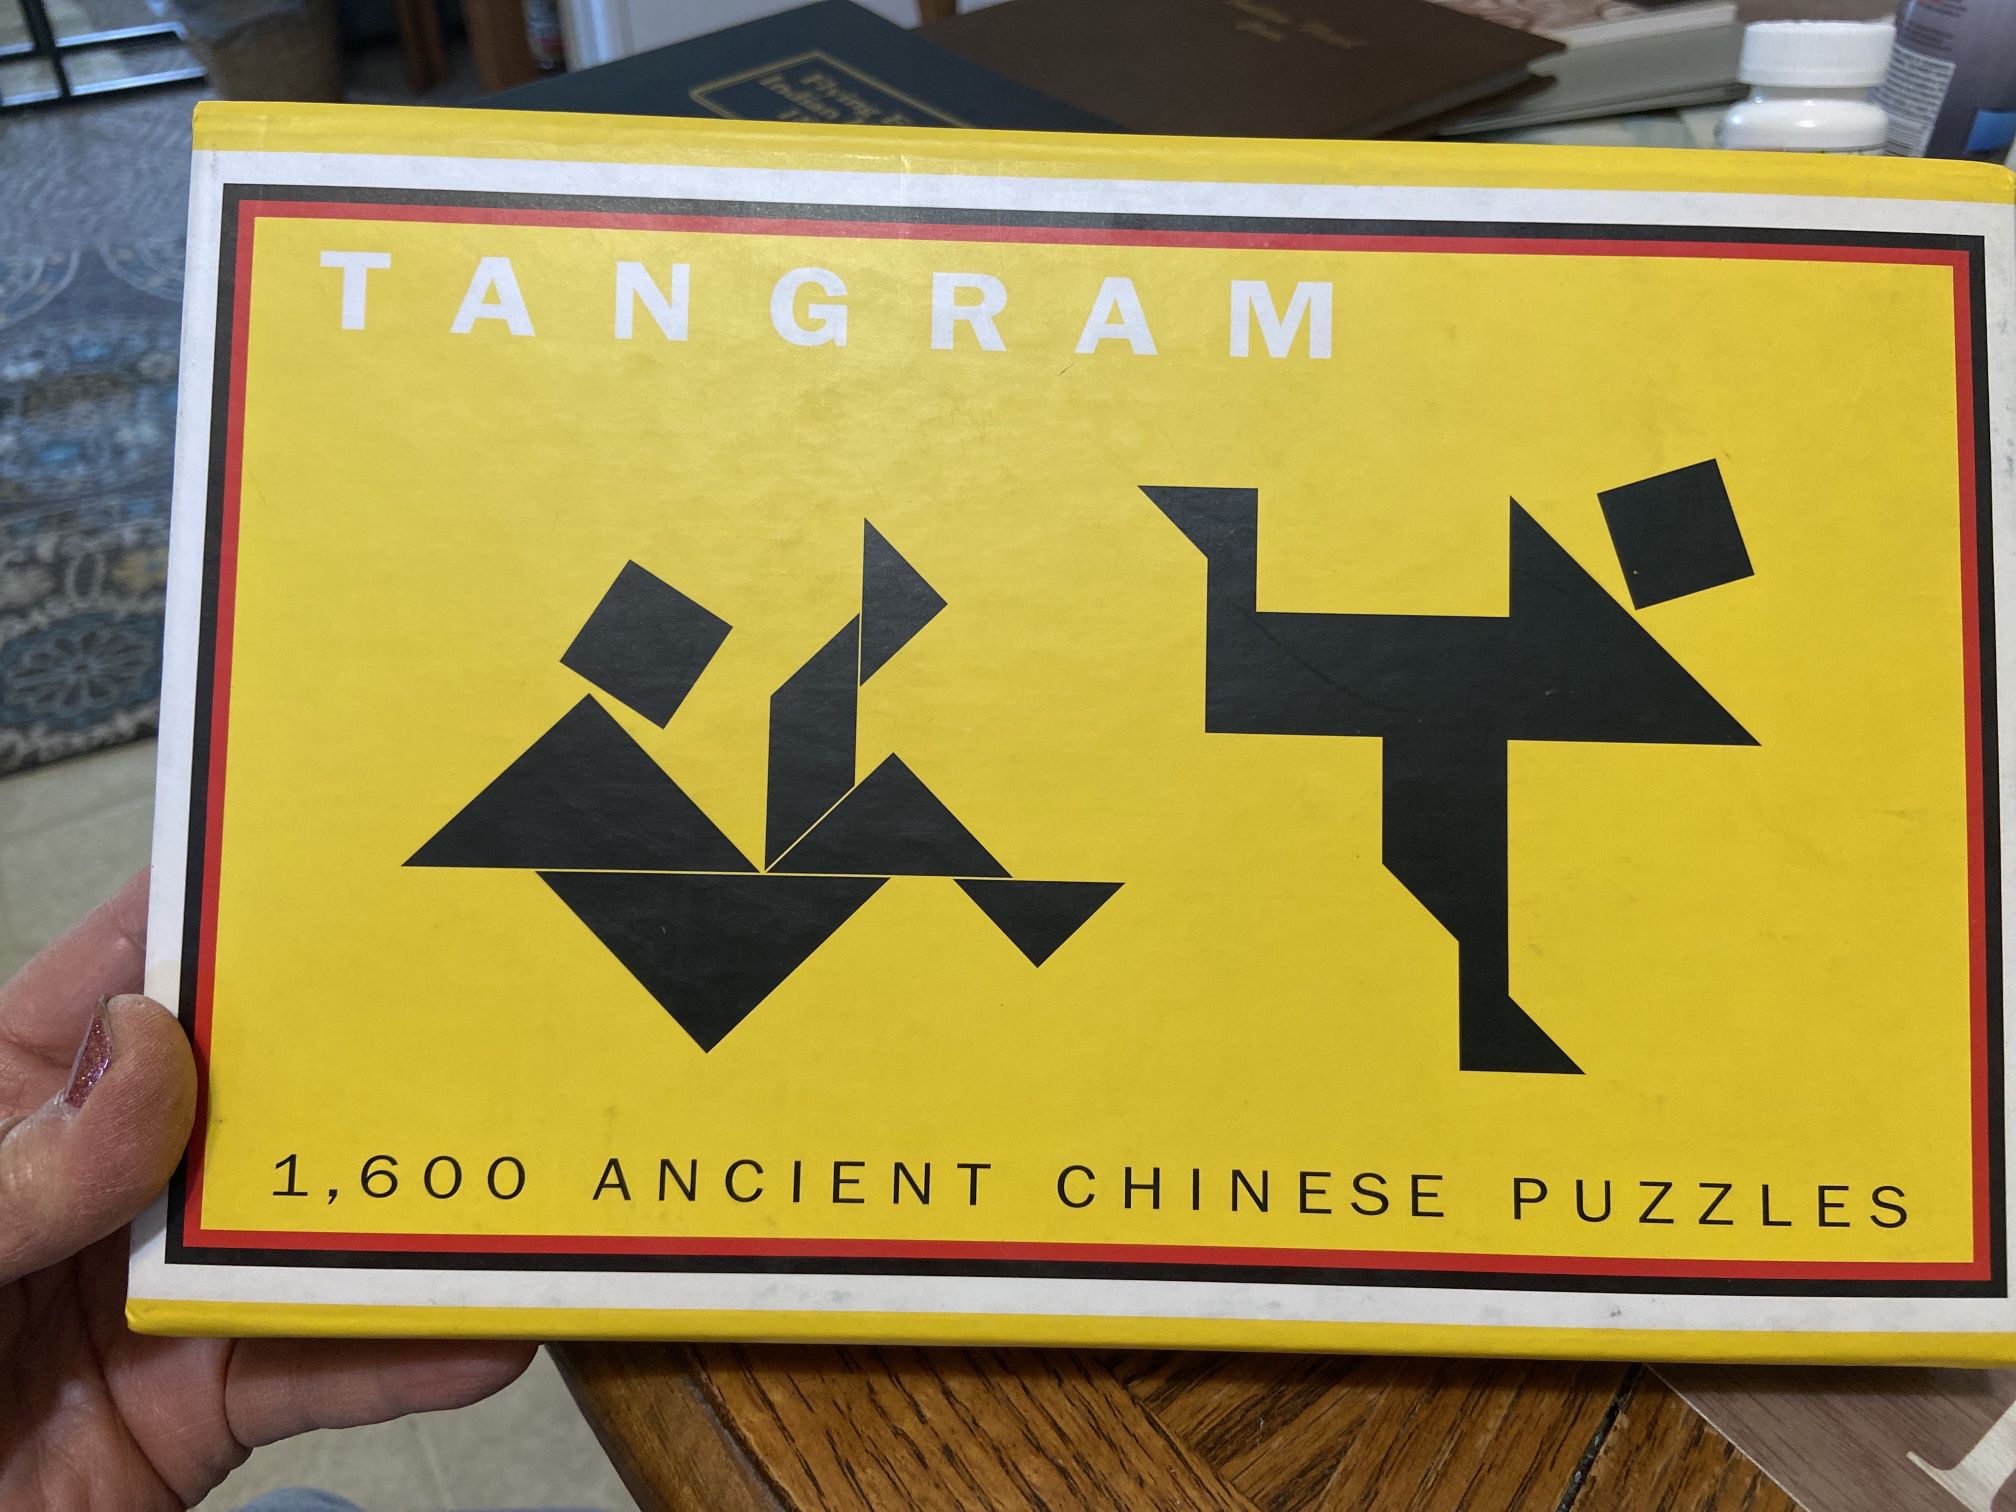 Tangram 1600 Ancient Chinese Puzzles game